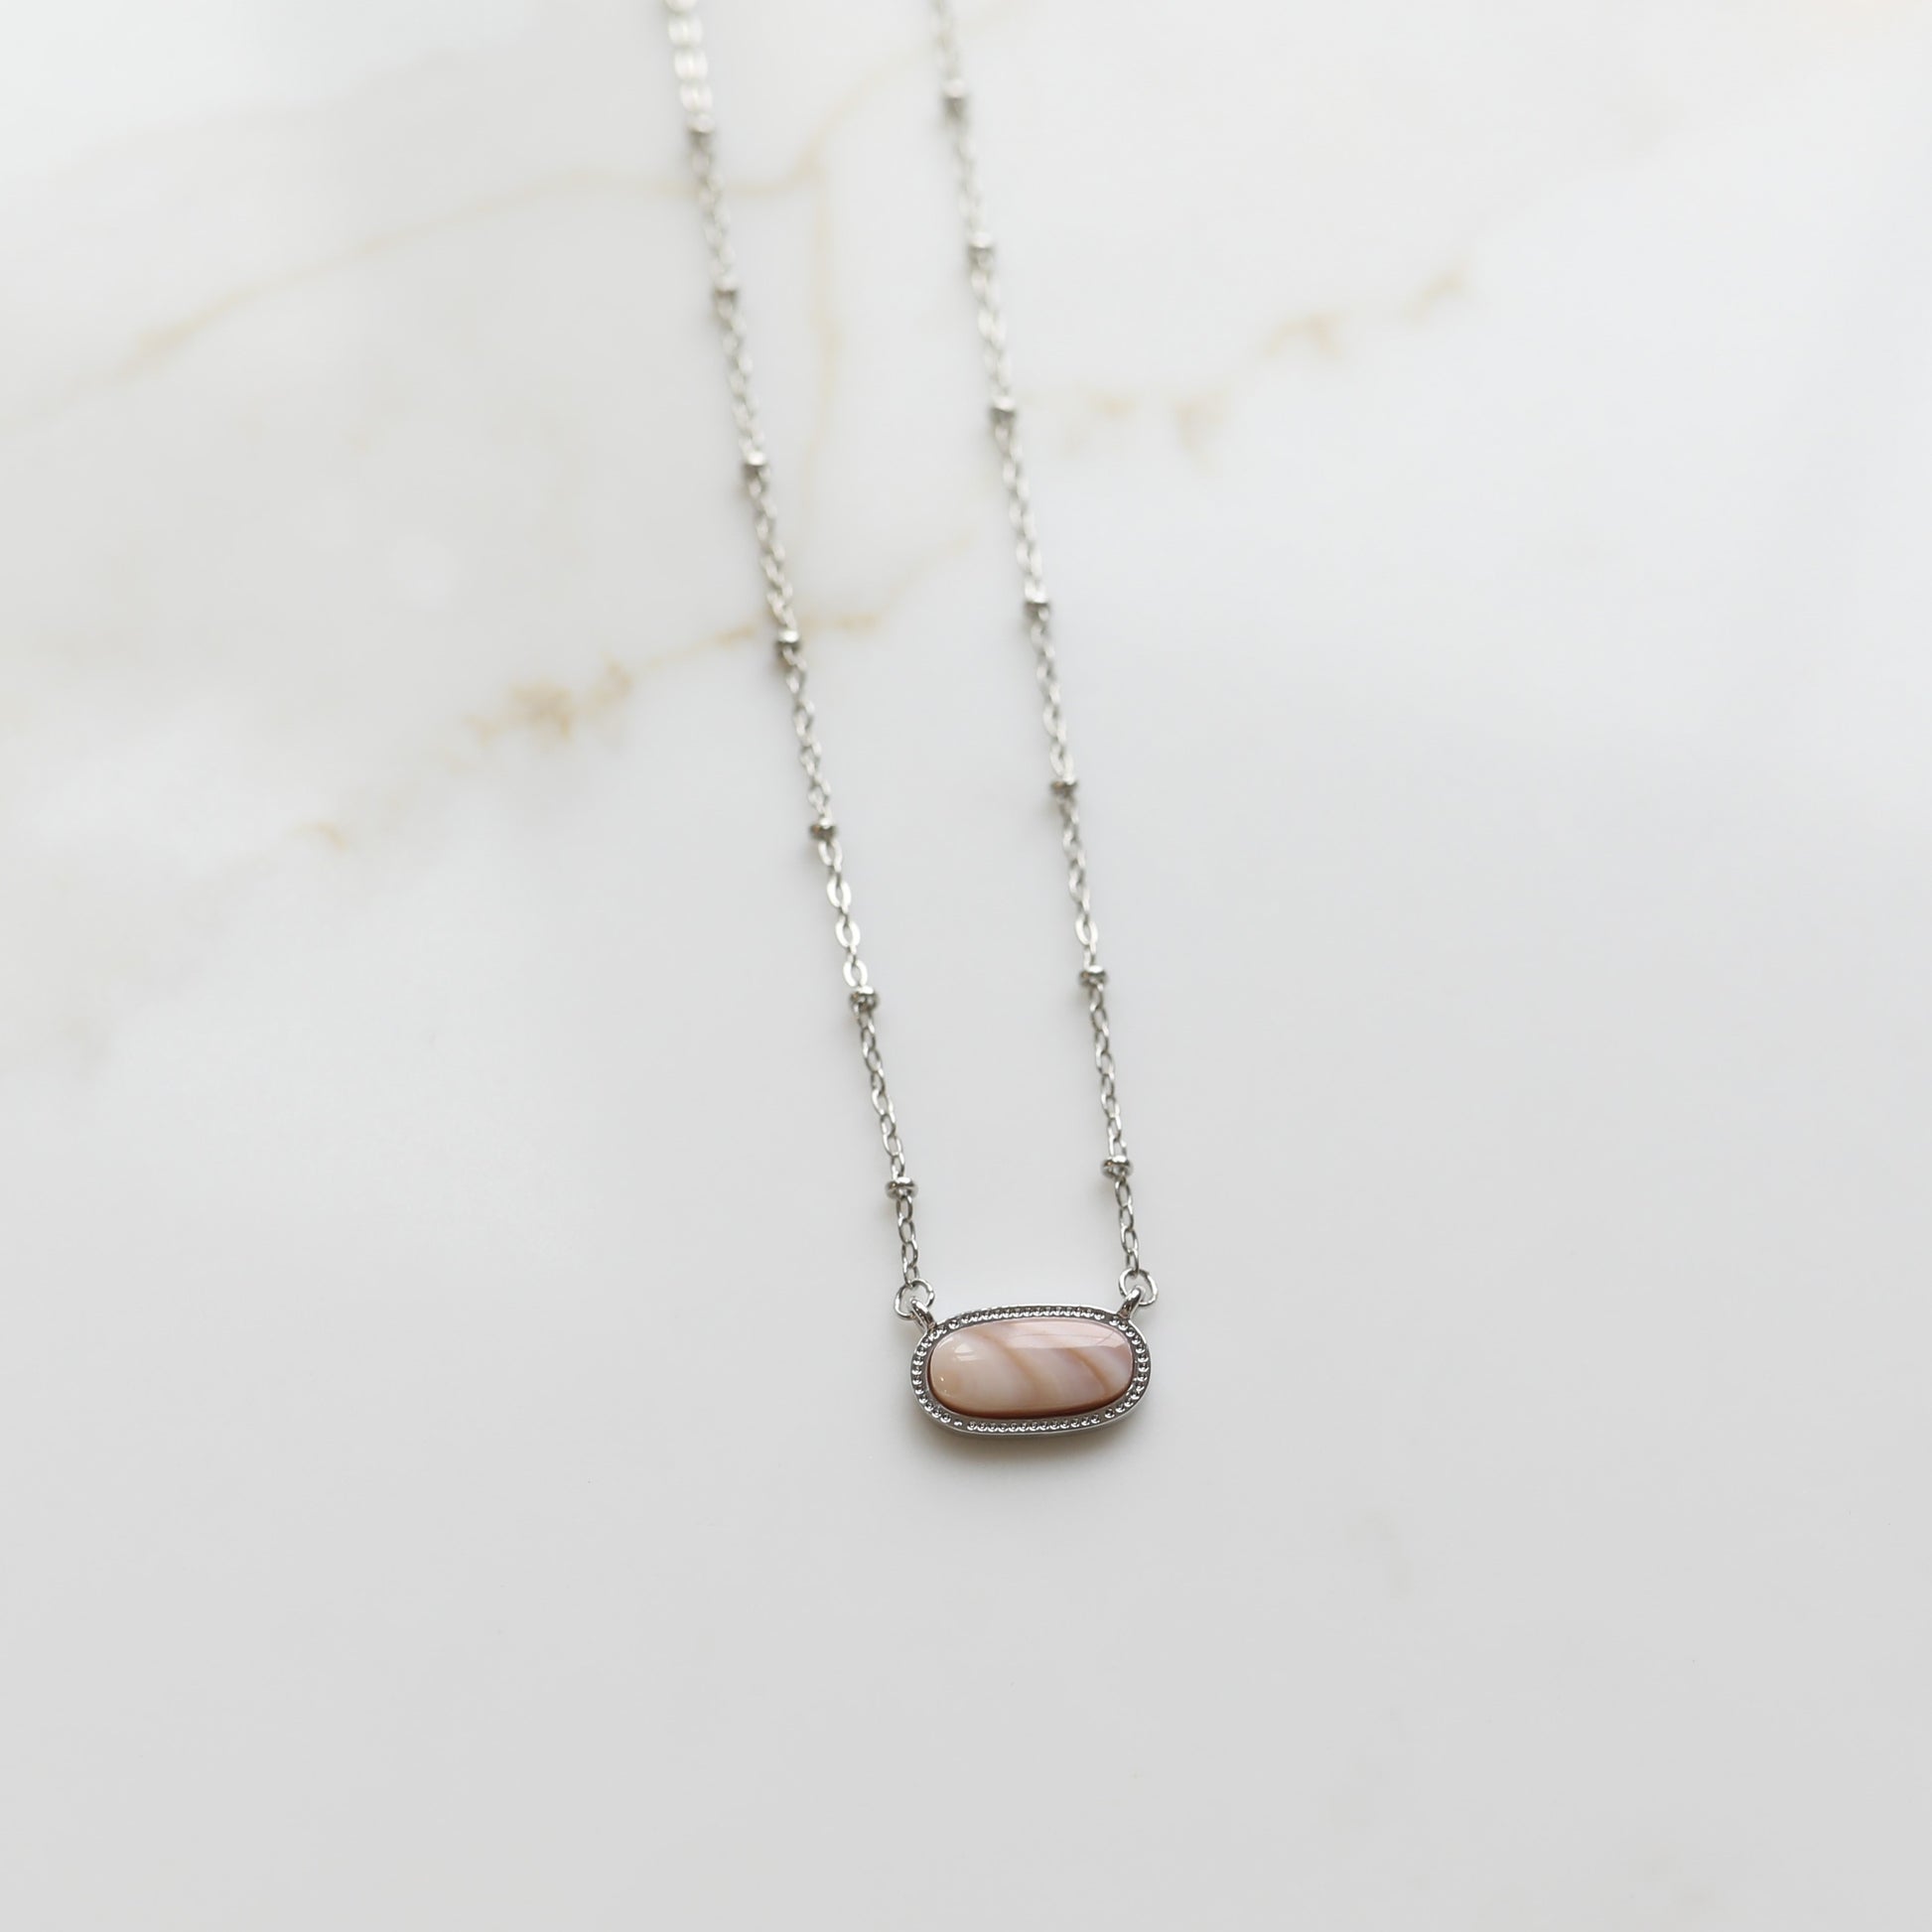 Meaningful Gemstone Necklace in Mother of Pearl Pink available with a Gold or Silver chain